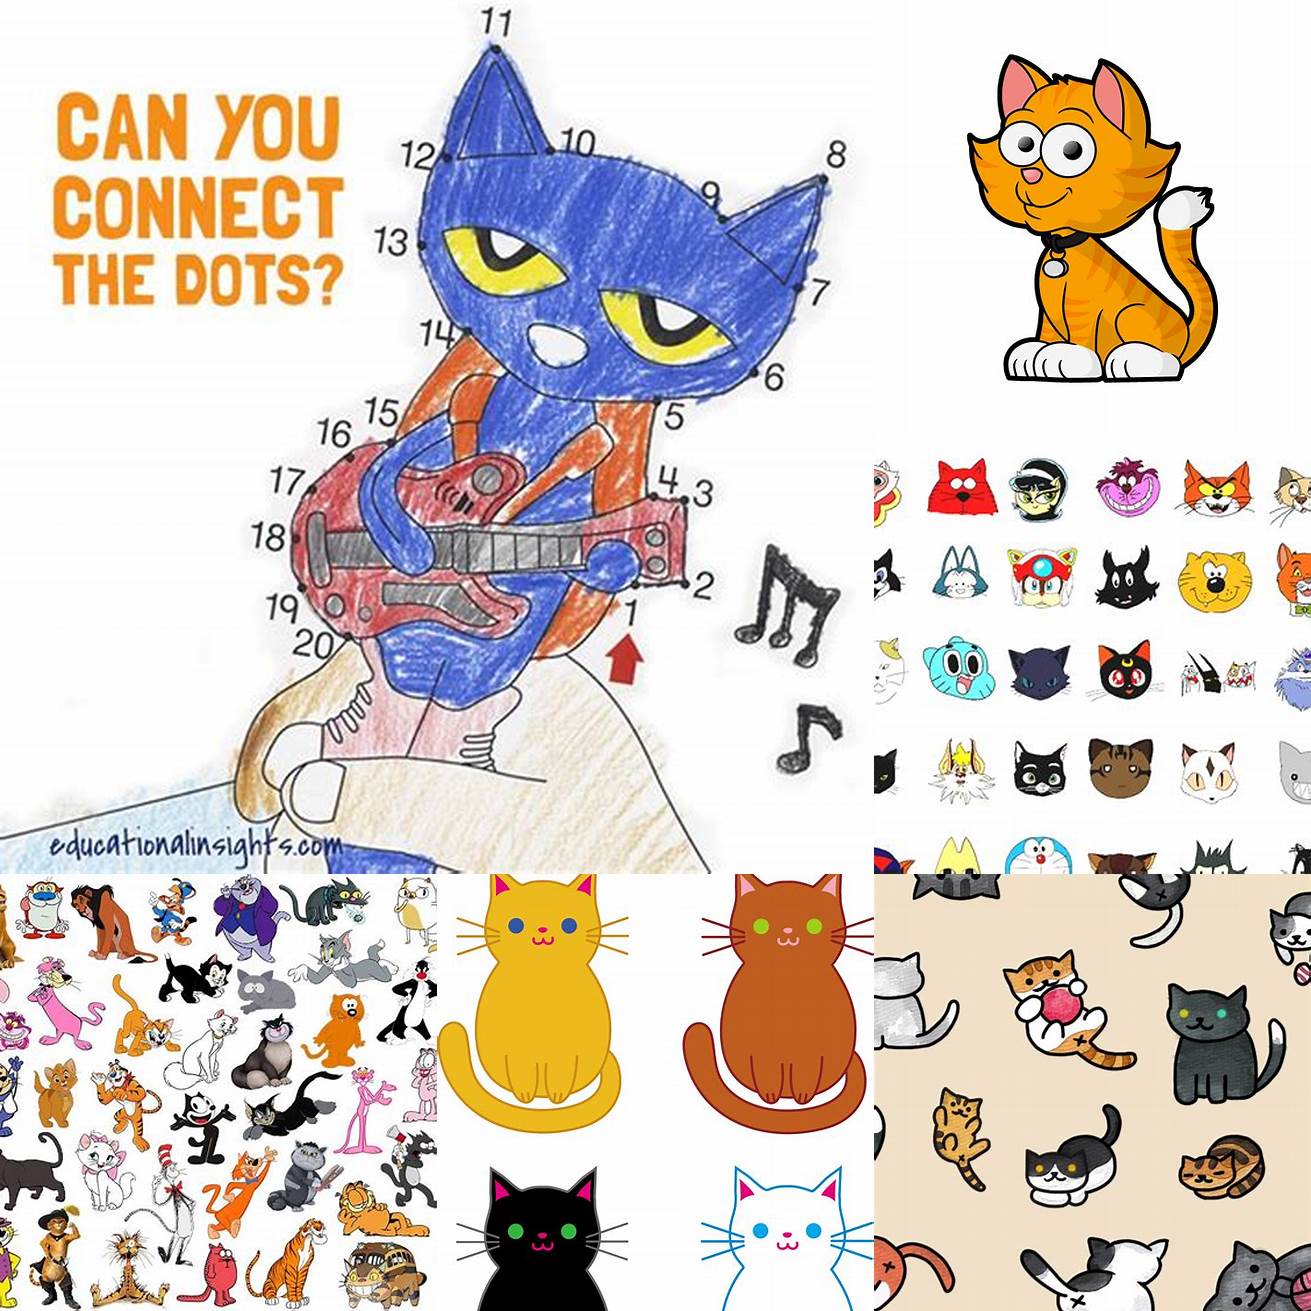 Use Cartoon Cats Phone Number as a fun way to connect with your favorite feline characters and brighten your day